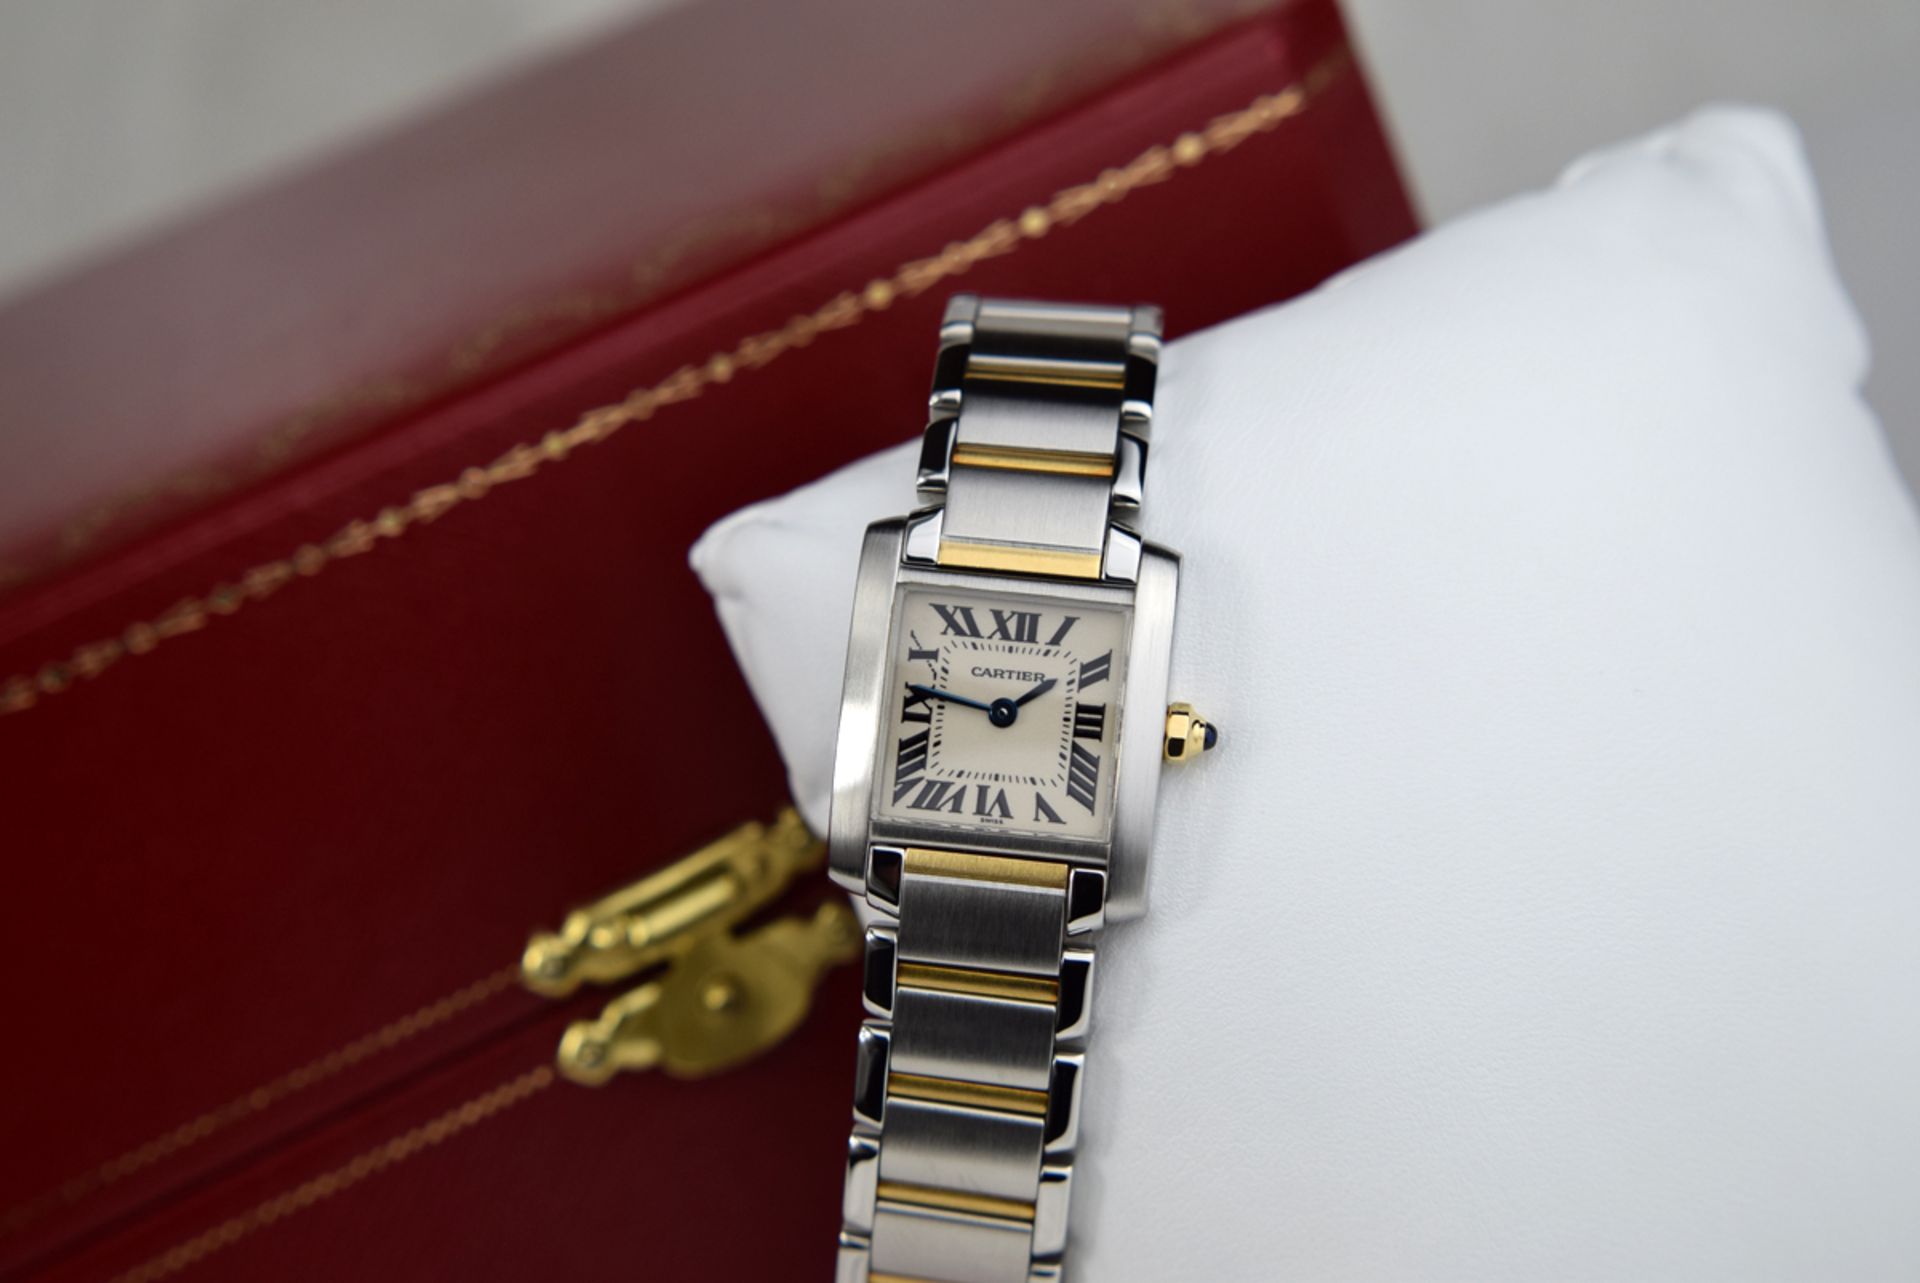 CARTIER 18K GOLD & STEEL FRANCAISE 'TANK' - W51007Q4 / 2300 - Image 2 of 10